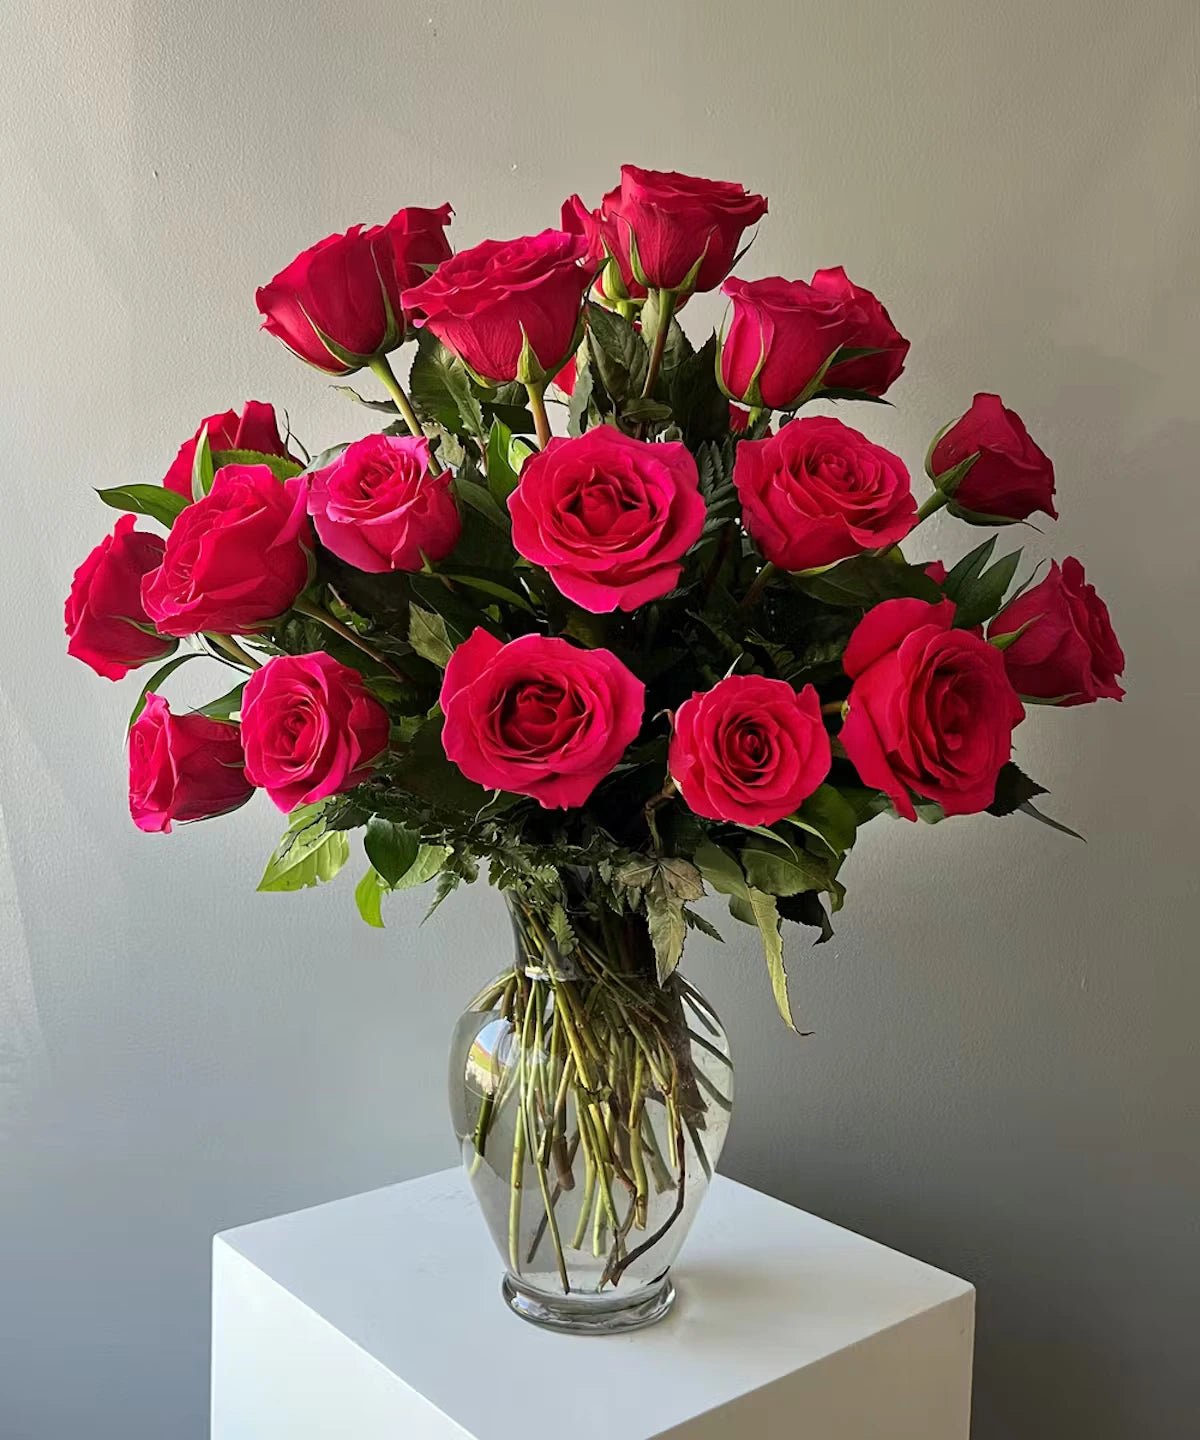 Hot Pink Roses in a Vase - Lily's Bloom Boutique